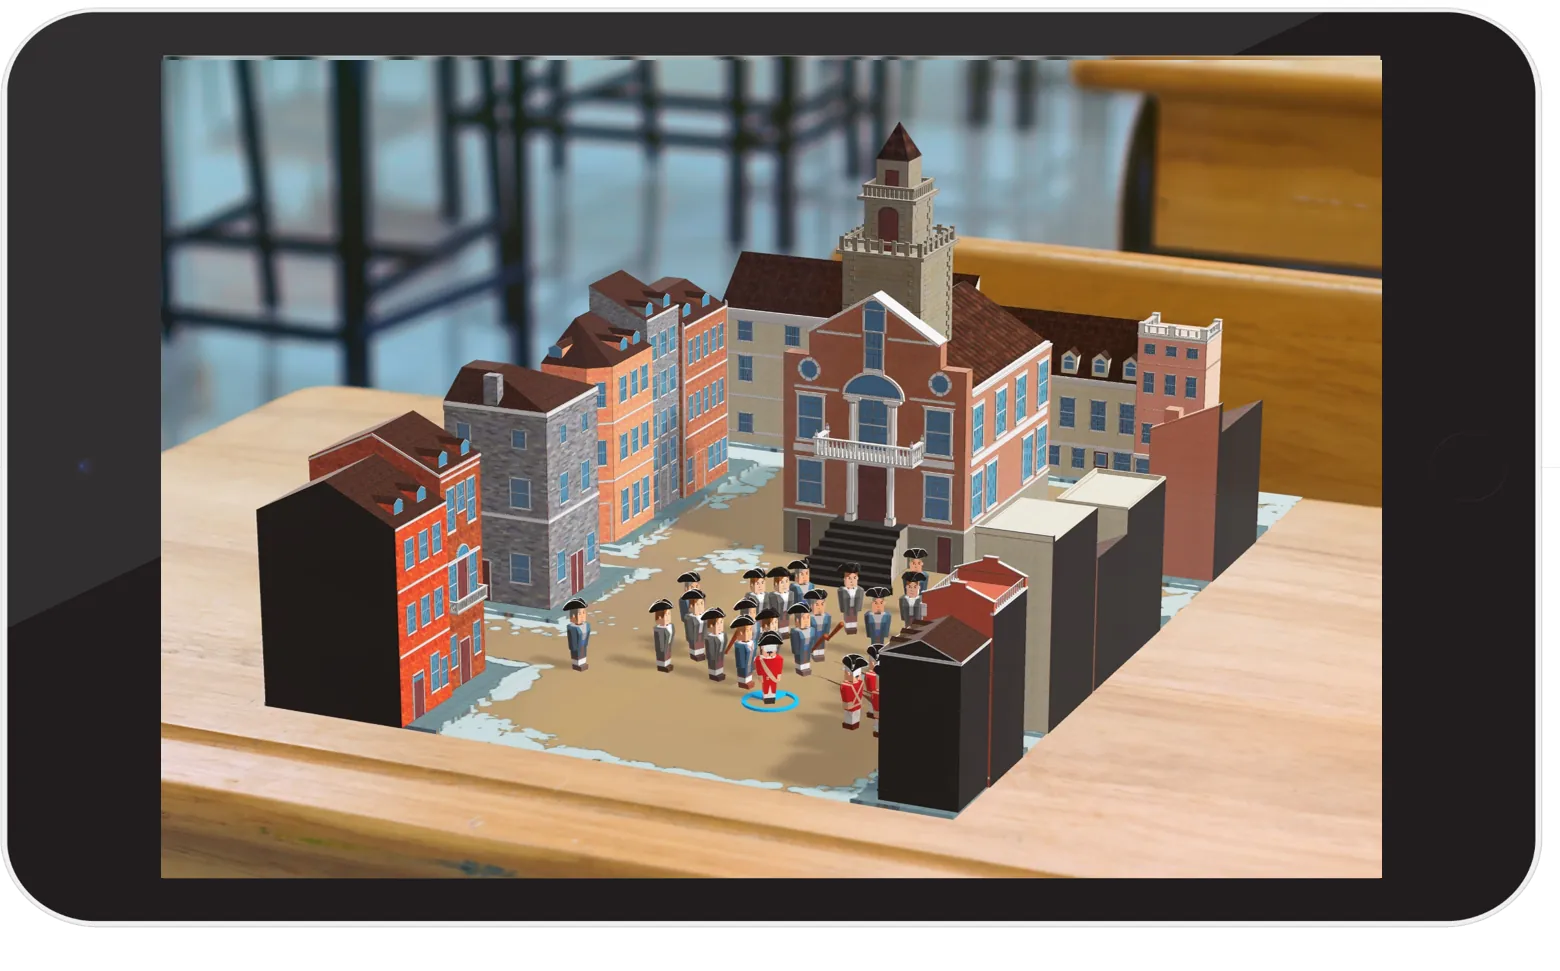 social studies augmented reality activity for classroom